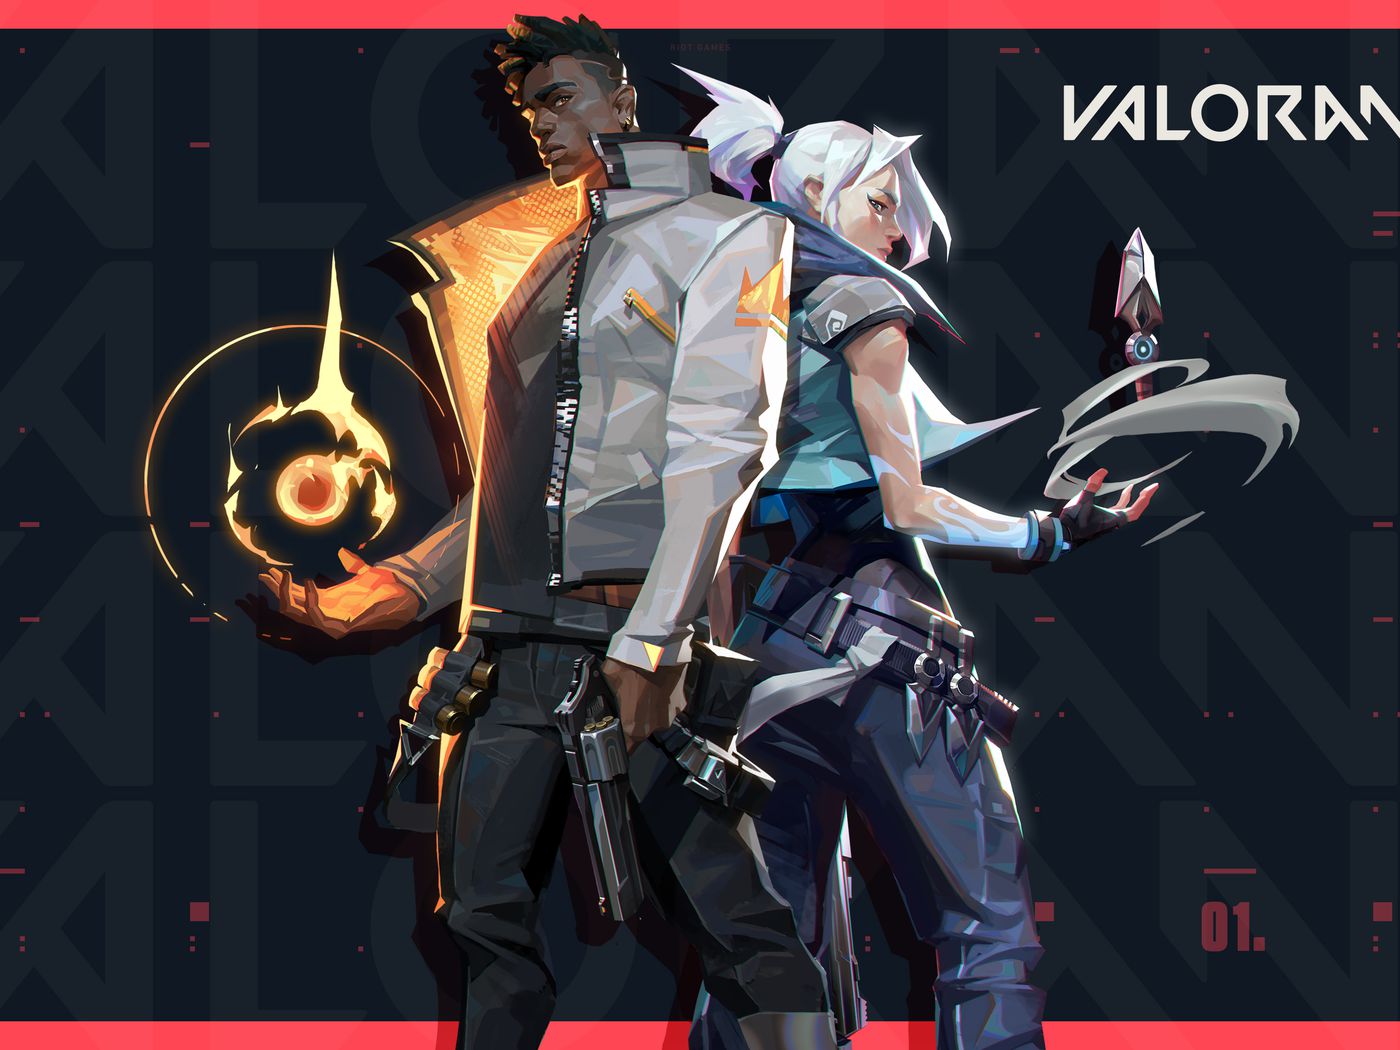 Valorant: Complete list of characters and abilities - Polygon